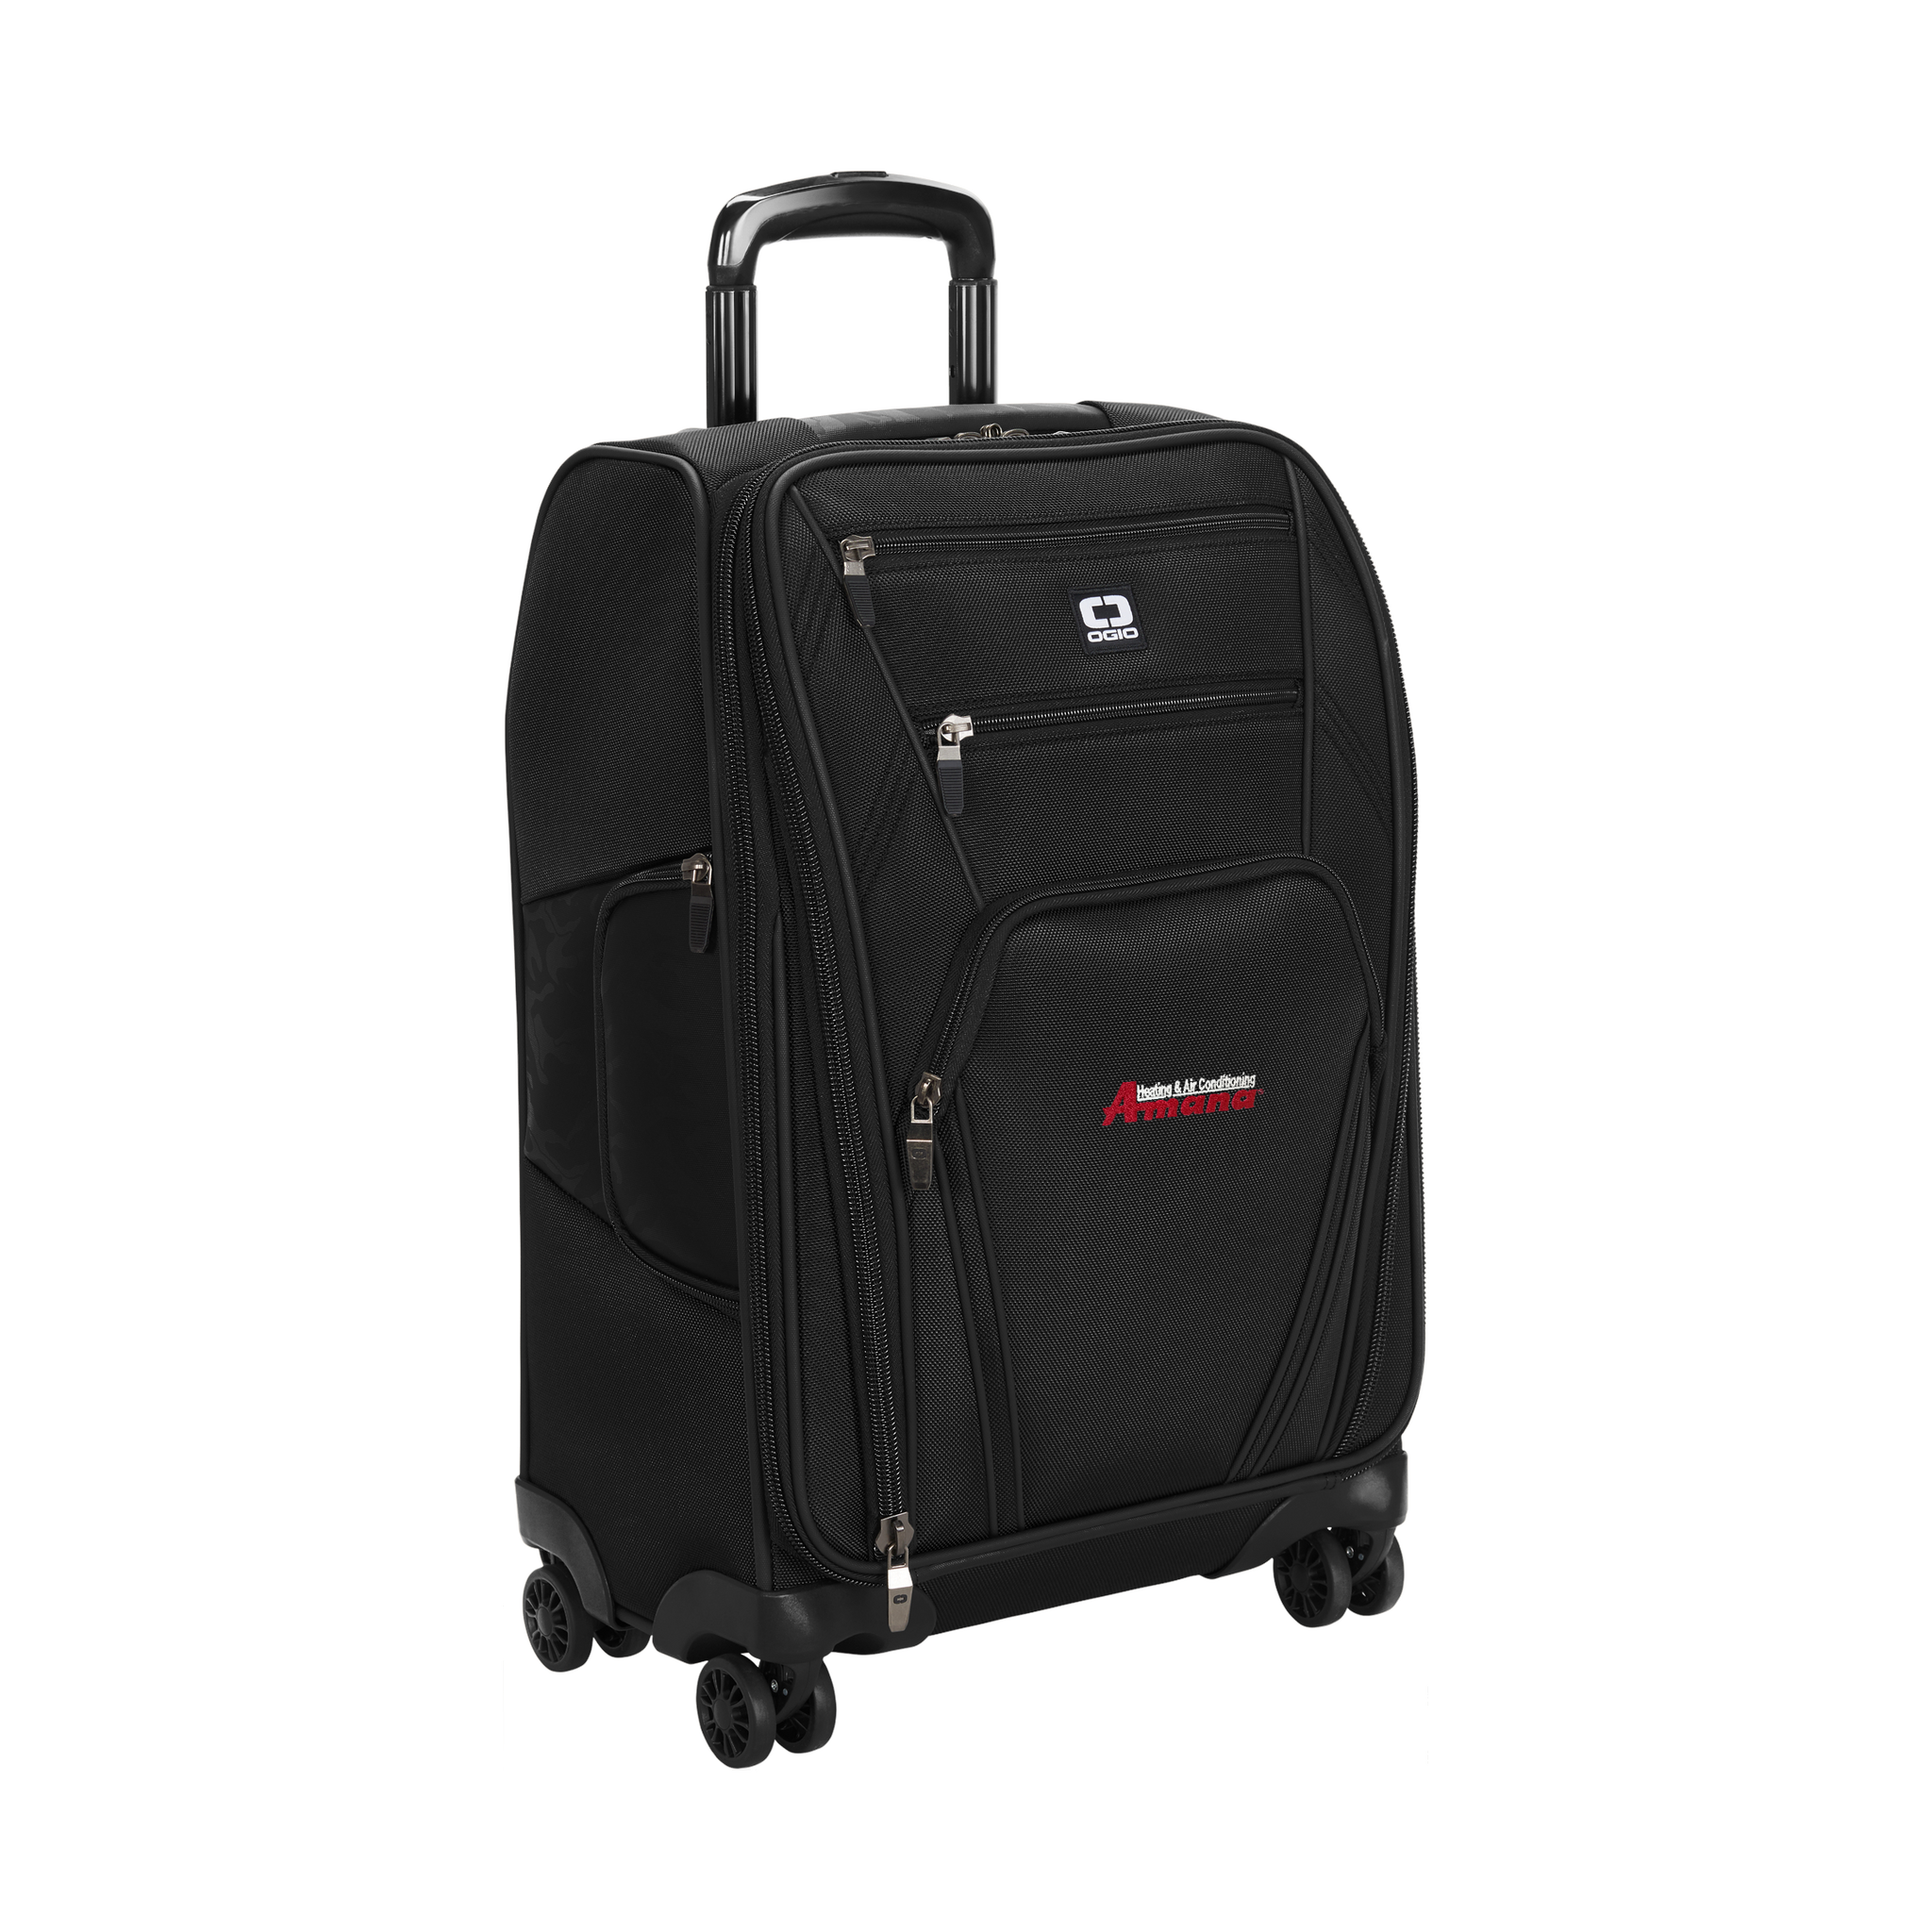 A2049 Revolve Spinner Luggage